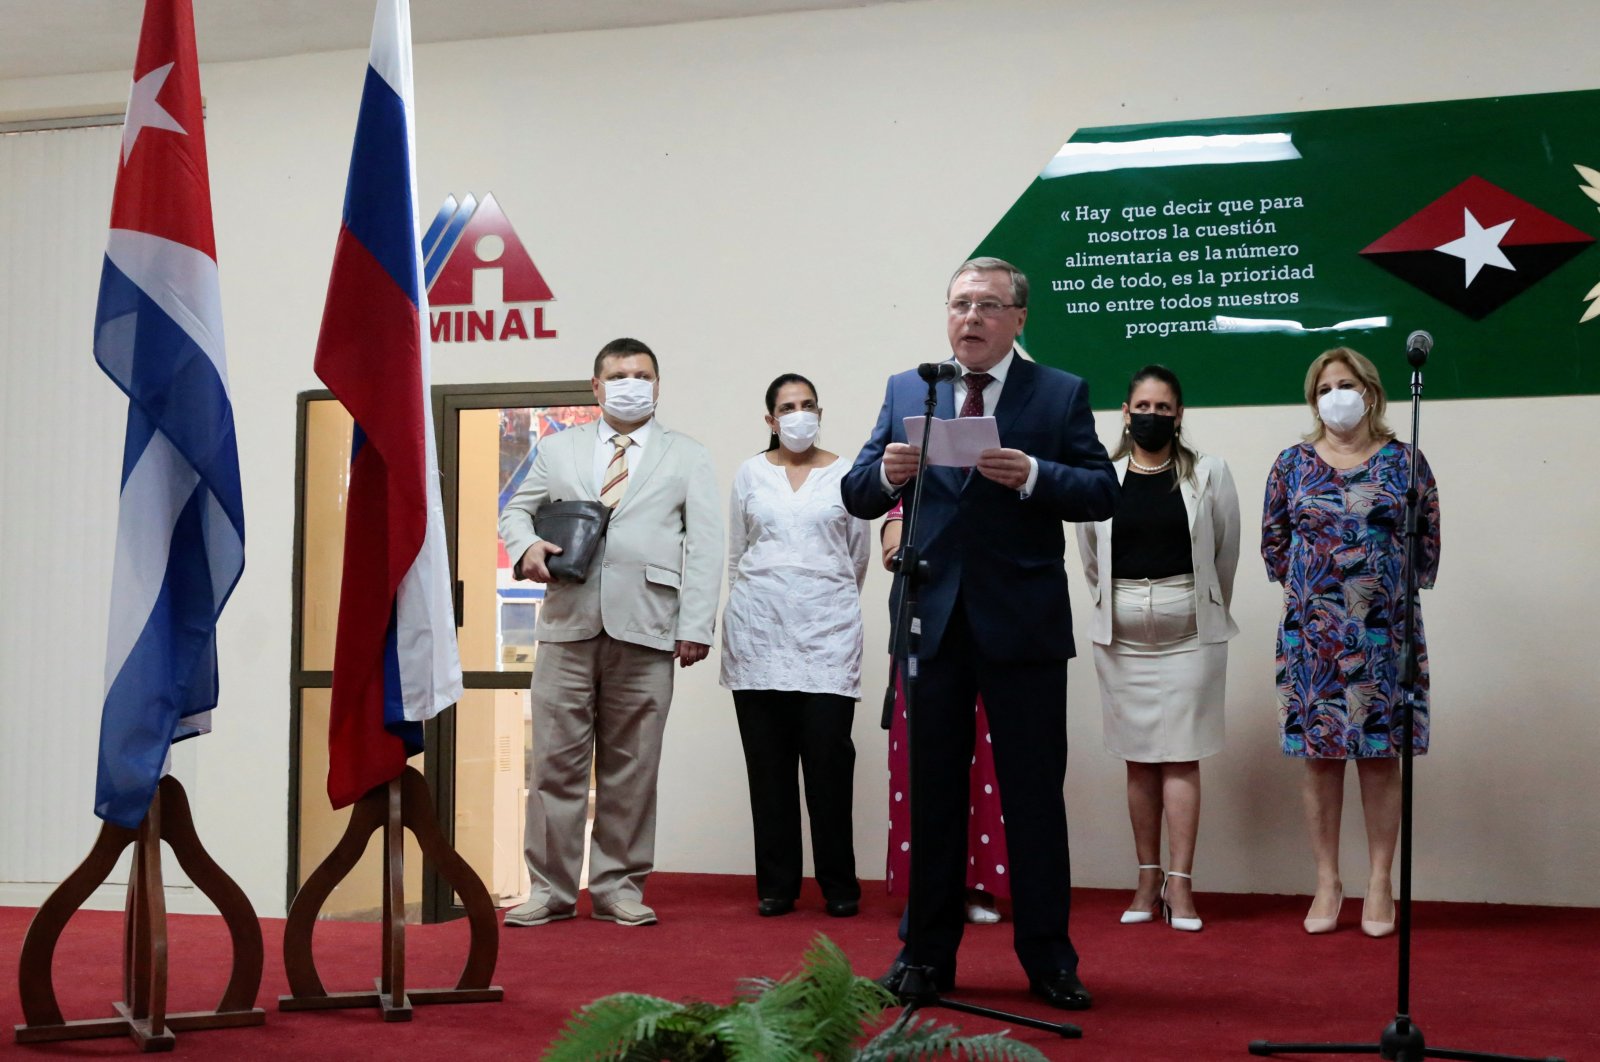 Russian Ambassador to Cuba Andrei Guskov speaks during a ceremony for the donation of wheat to Cuba, amid the Russian invasion of Ukraine, in Havana, Cuba, April 21, 2022. (REUTERS Photo)